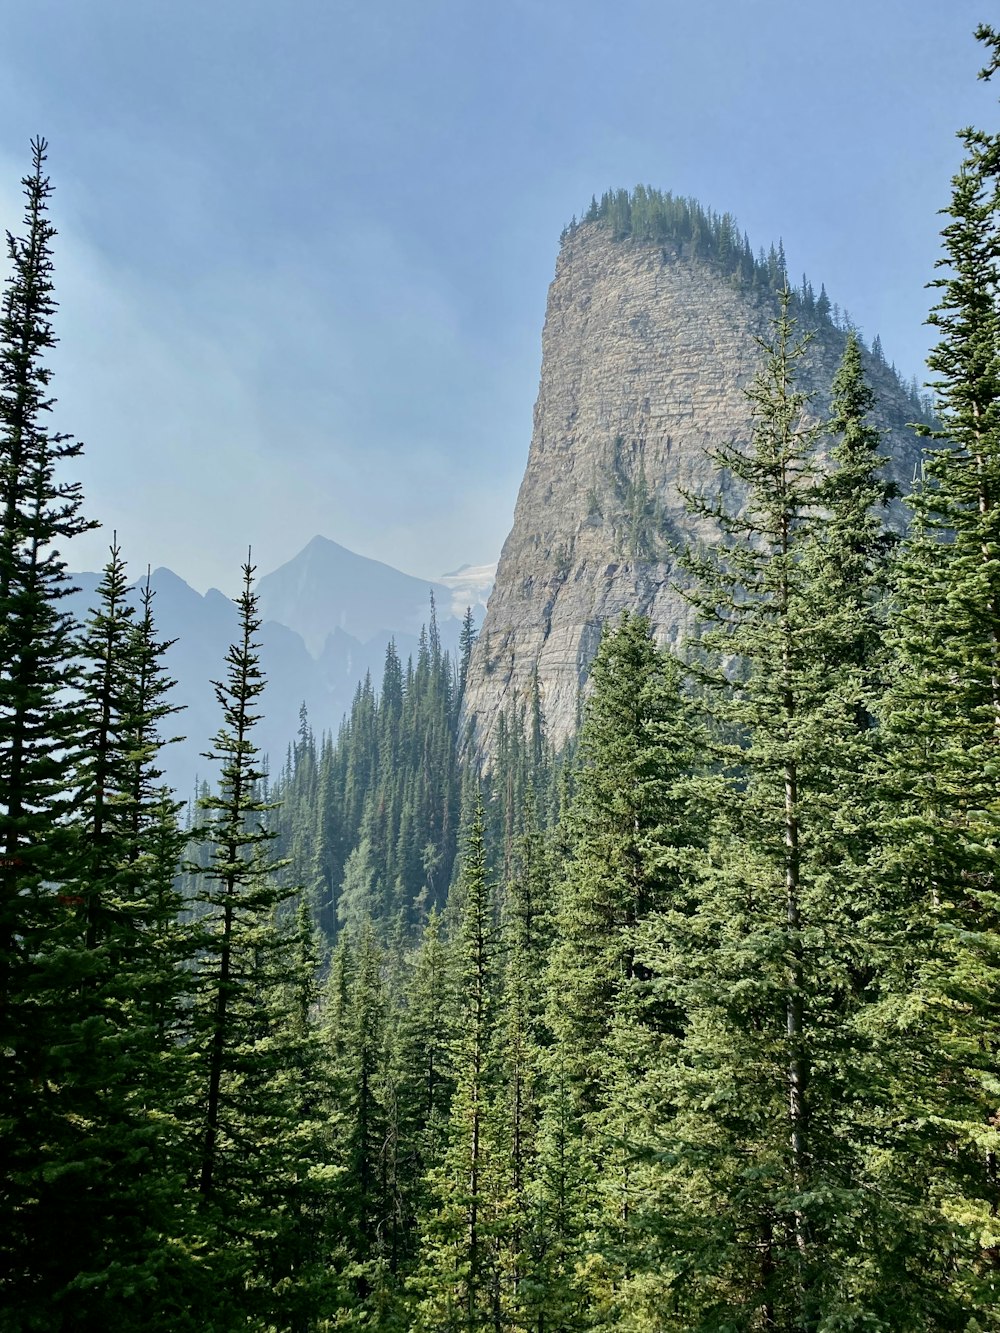 a view of a mountain with trees and mountains in the background